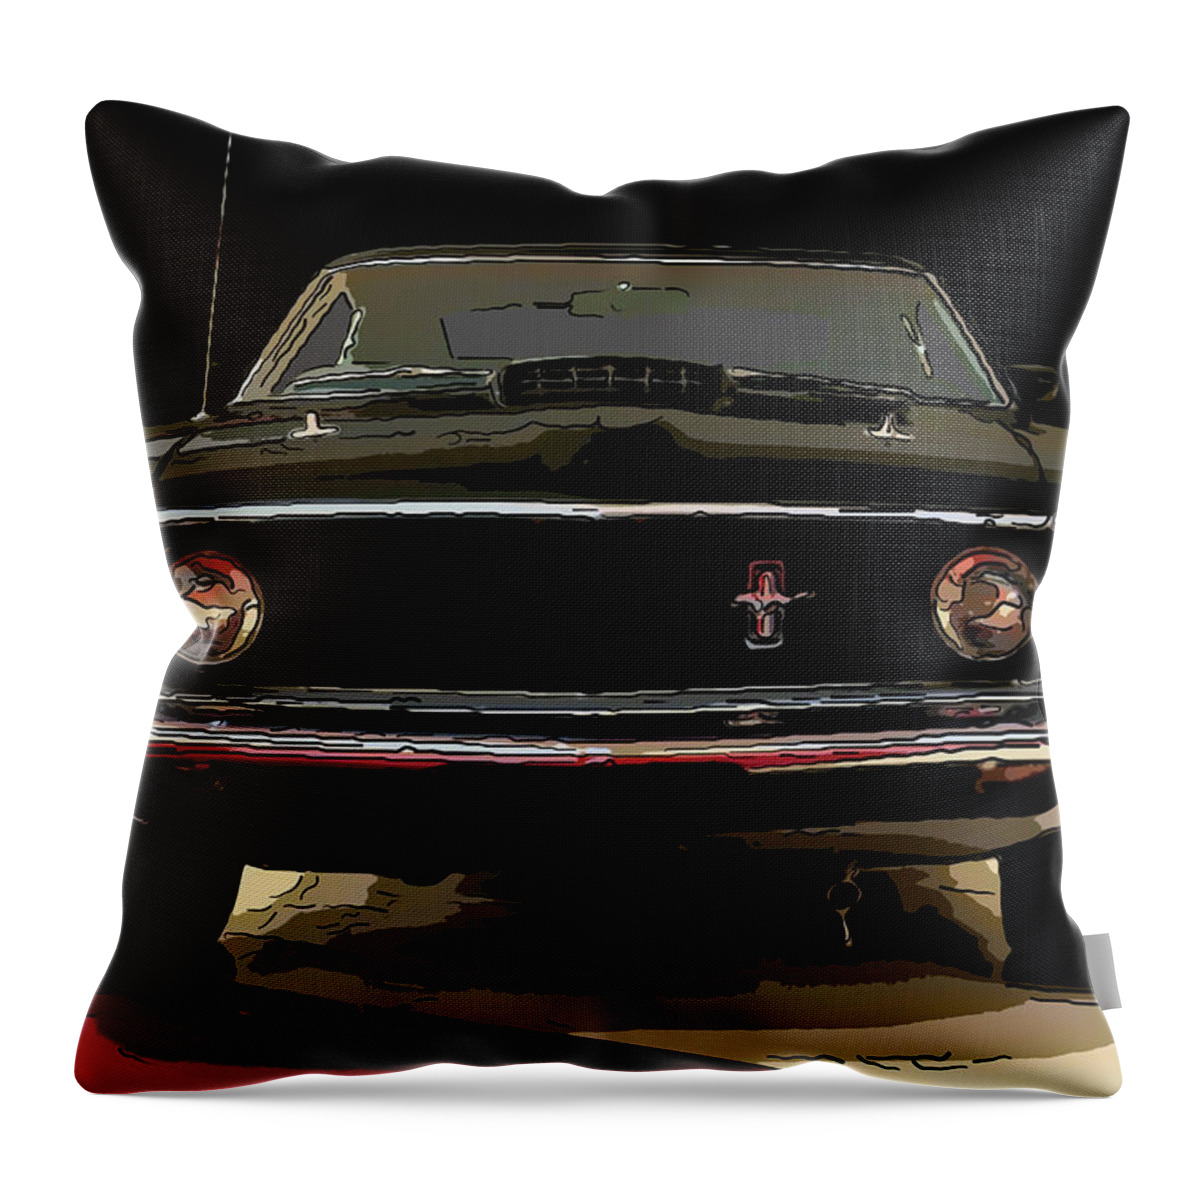 1969 Ford Mustang Throw Pillow featuring the drawing 1969 Ford Mustang Digital drawing by Flees Photos